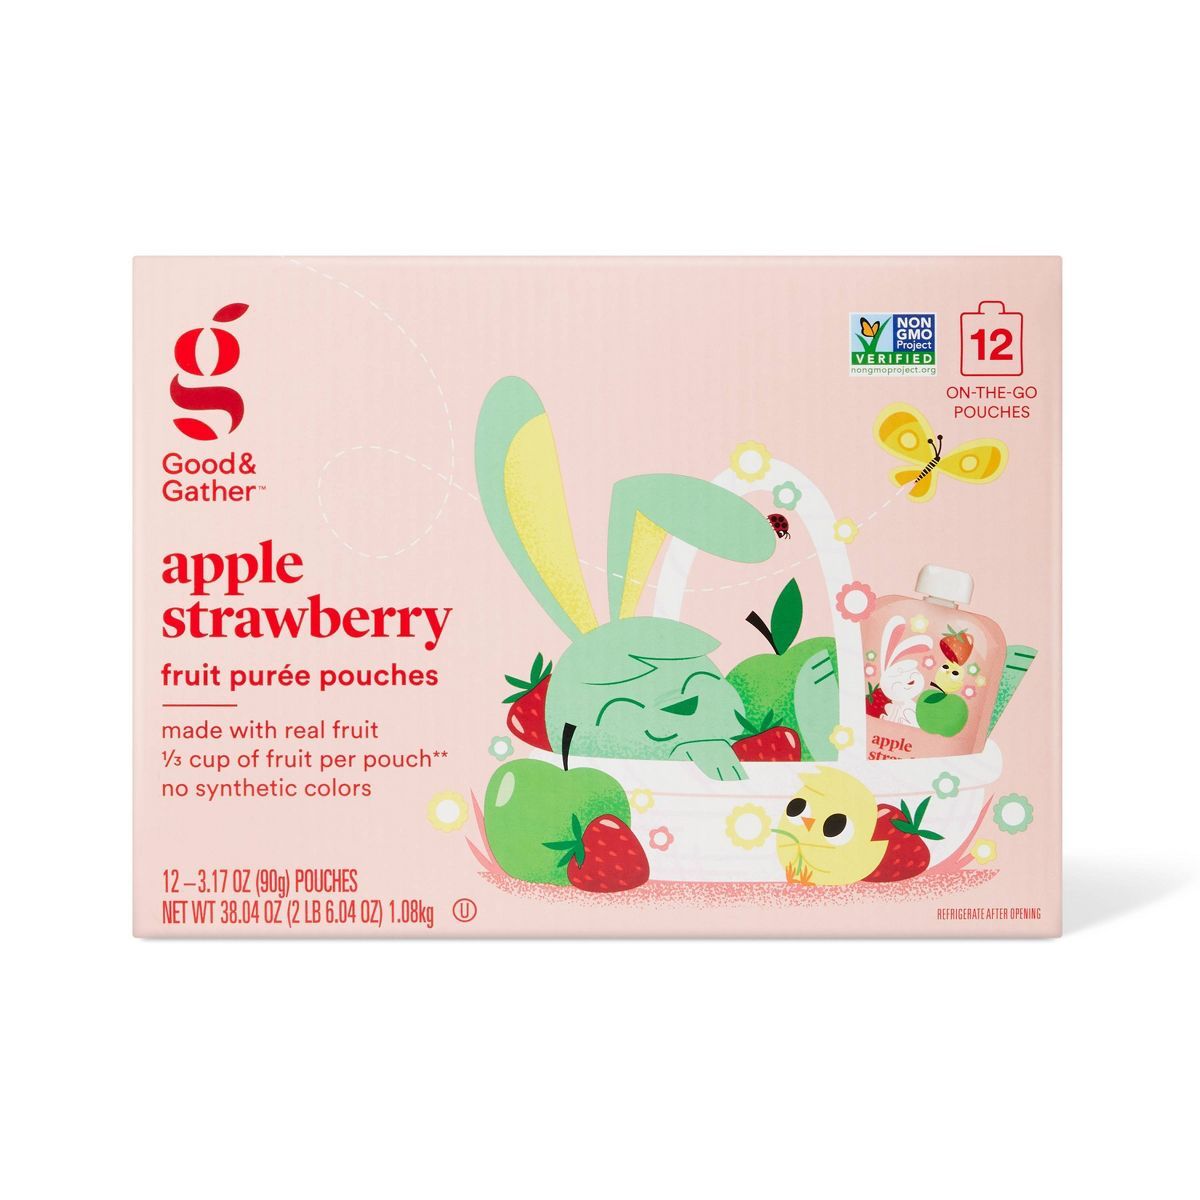 Spring Strawberry Applesauce Pouches - 12ct/38.04oz - Good & Gather™ | Target